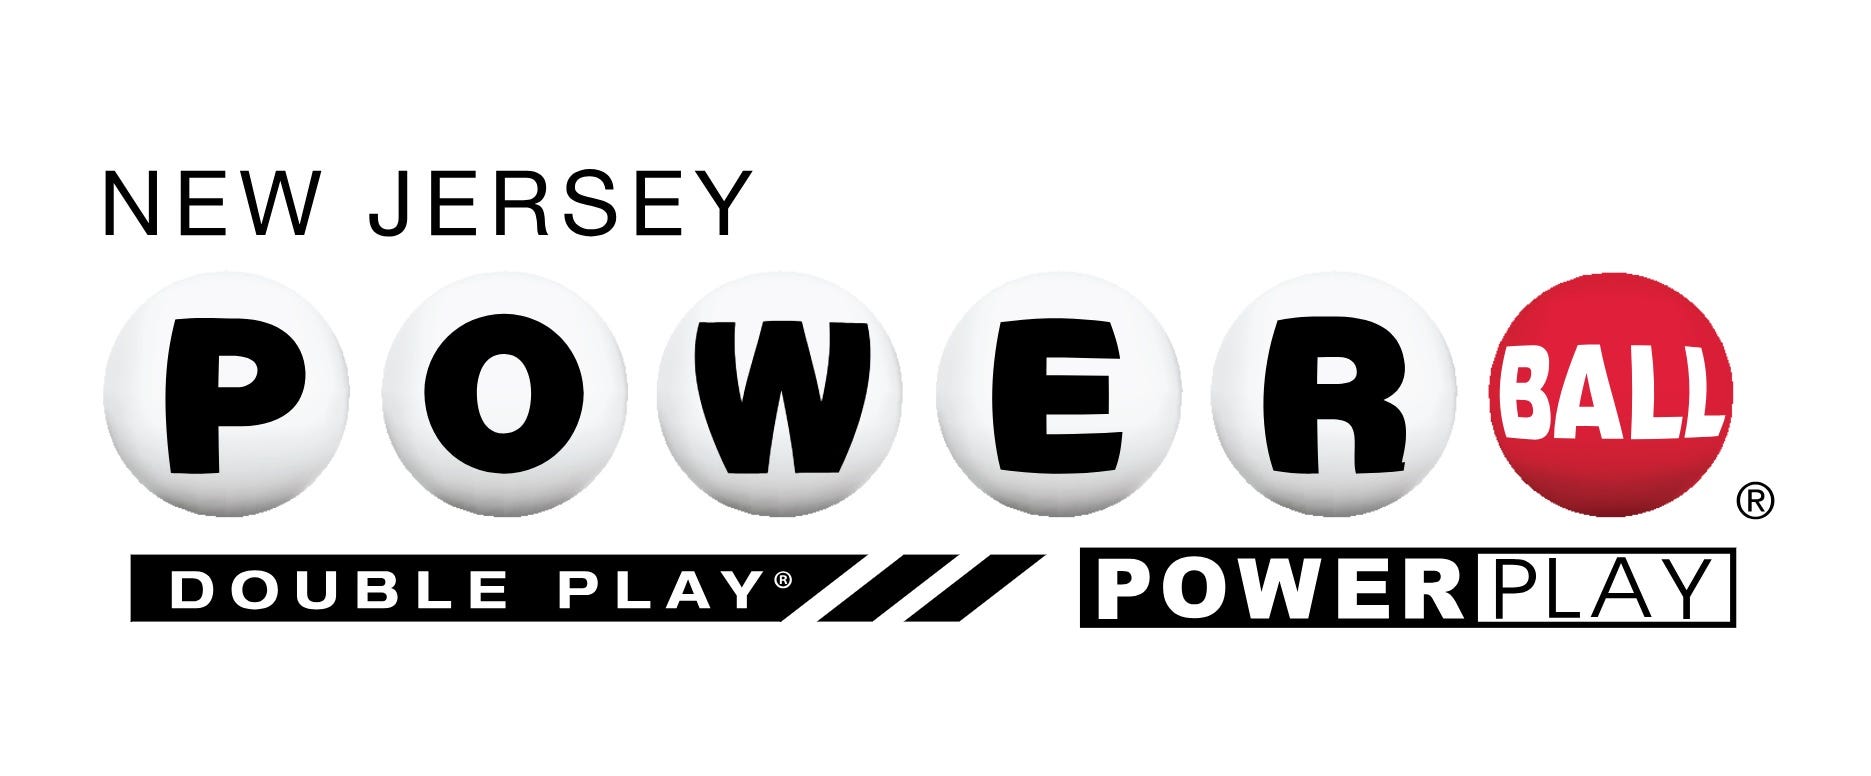 new jersey lottery player wins $2 million in wednesday's powerball drawing